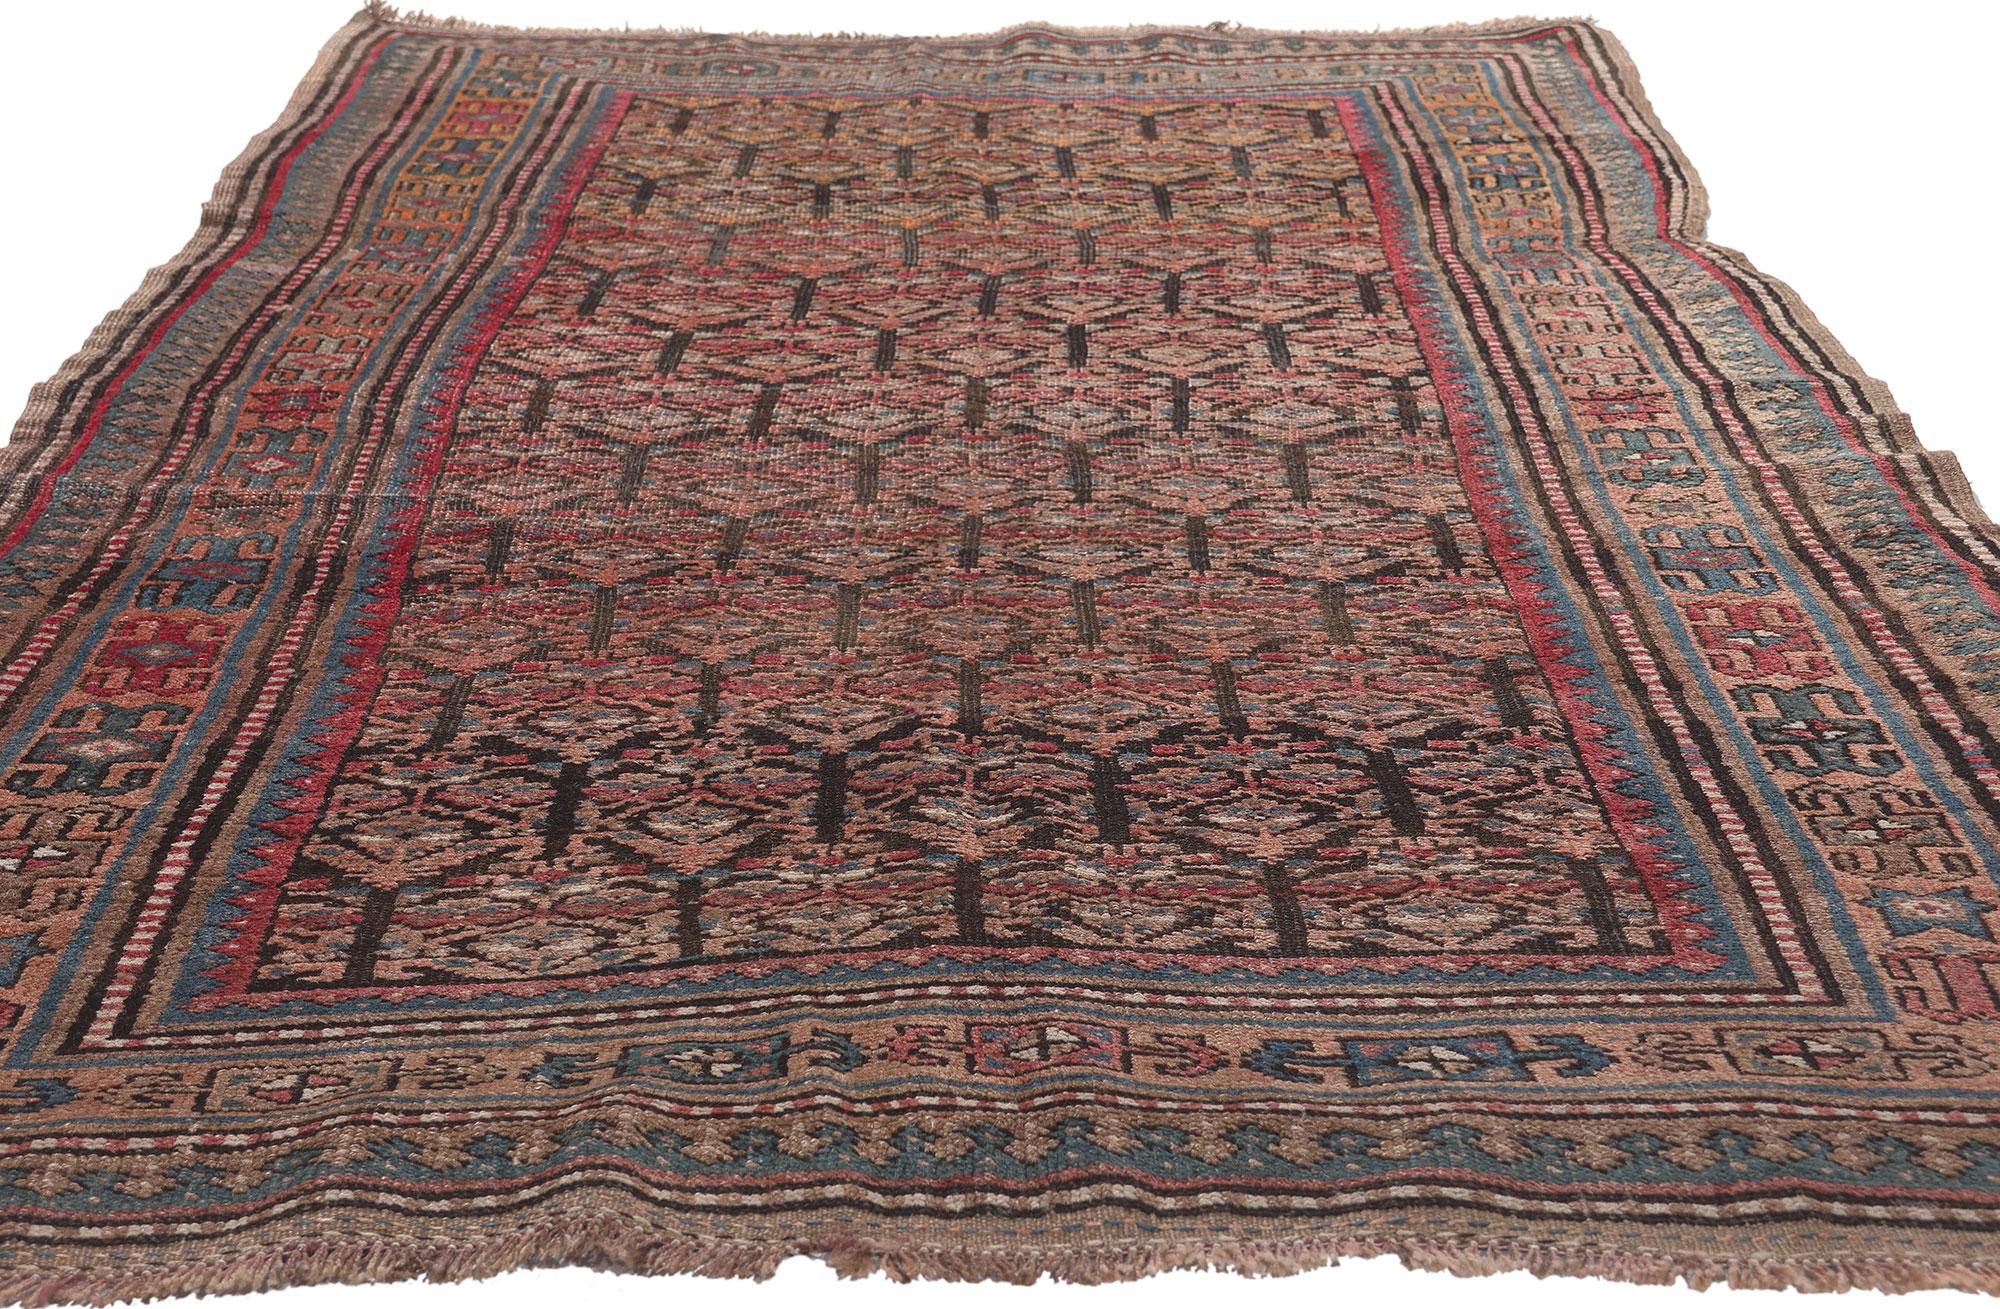 Tribal Antique Persian Kurdish Rug, Rugged Beauty Meets Laid-Back Luxury For Sale